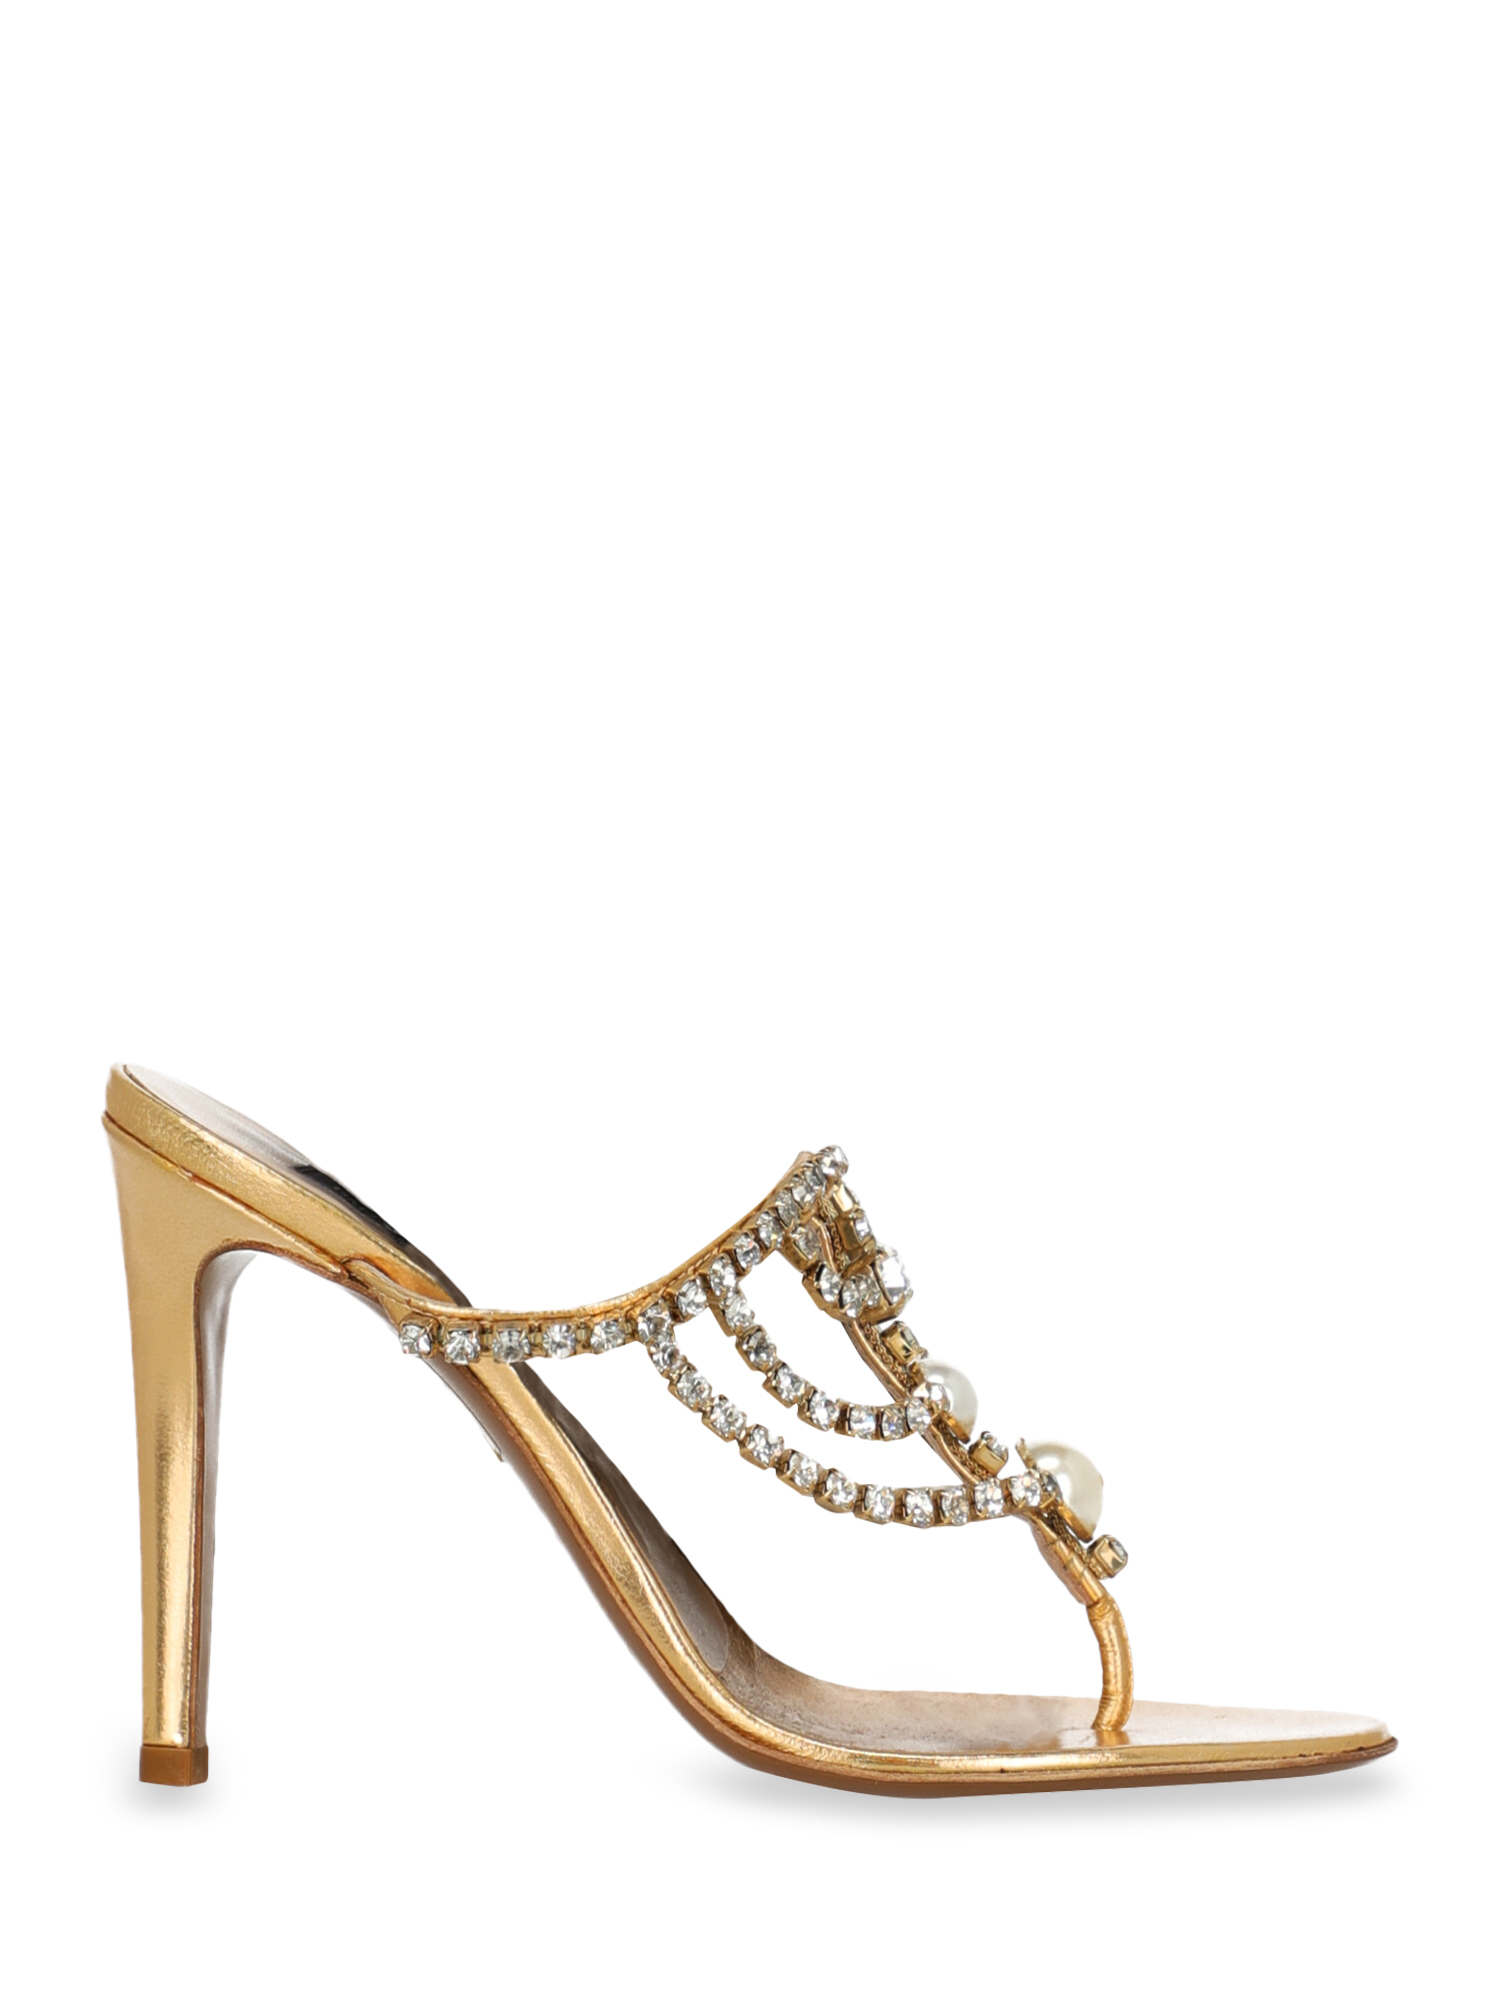 Pre-owned Emilio Pucci Shoe In Gold